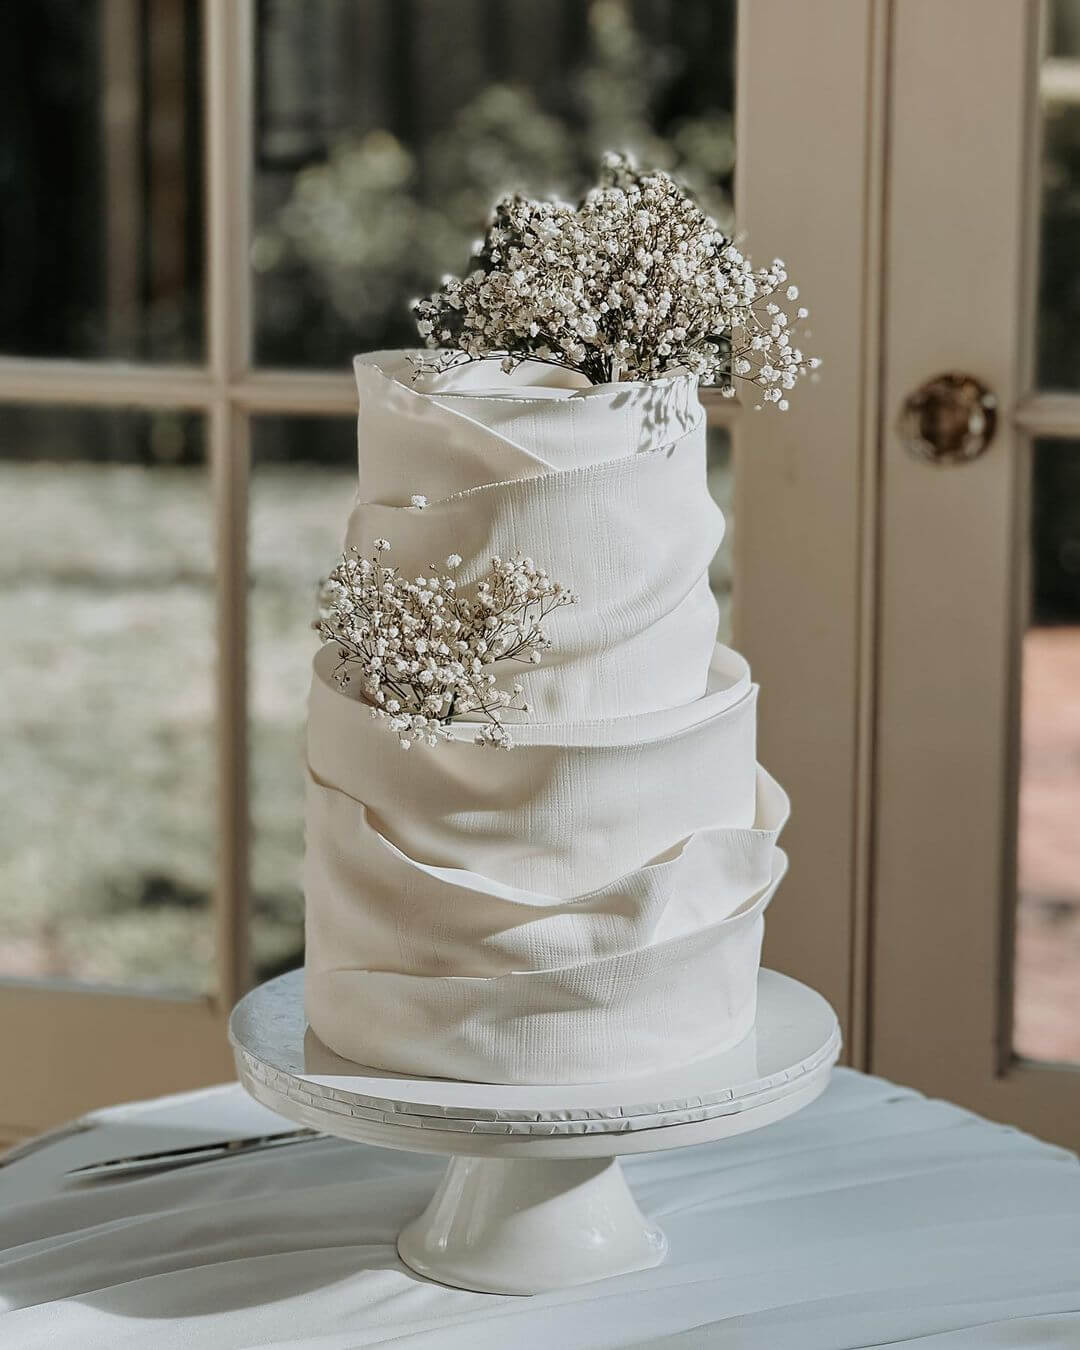 Wedding Cakes | Wedding Cake Toppers, Decorations and Pictures